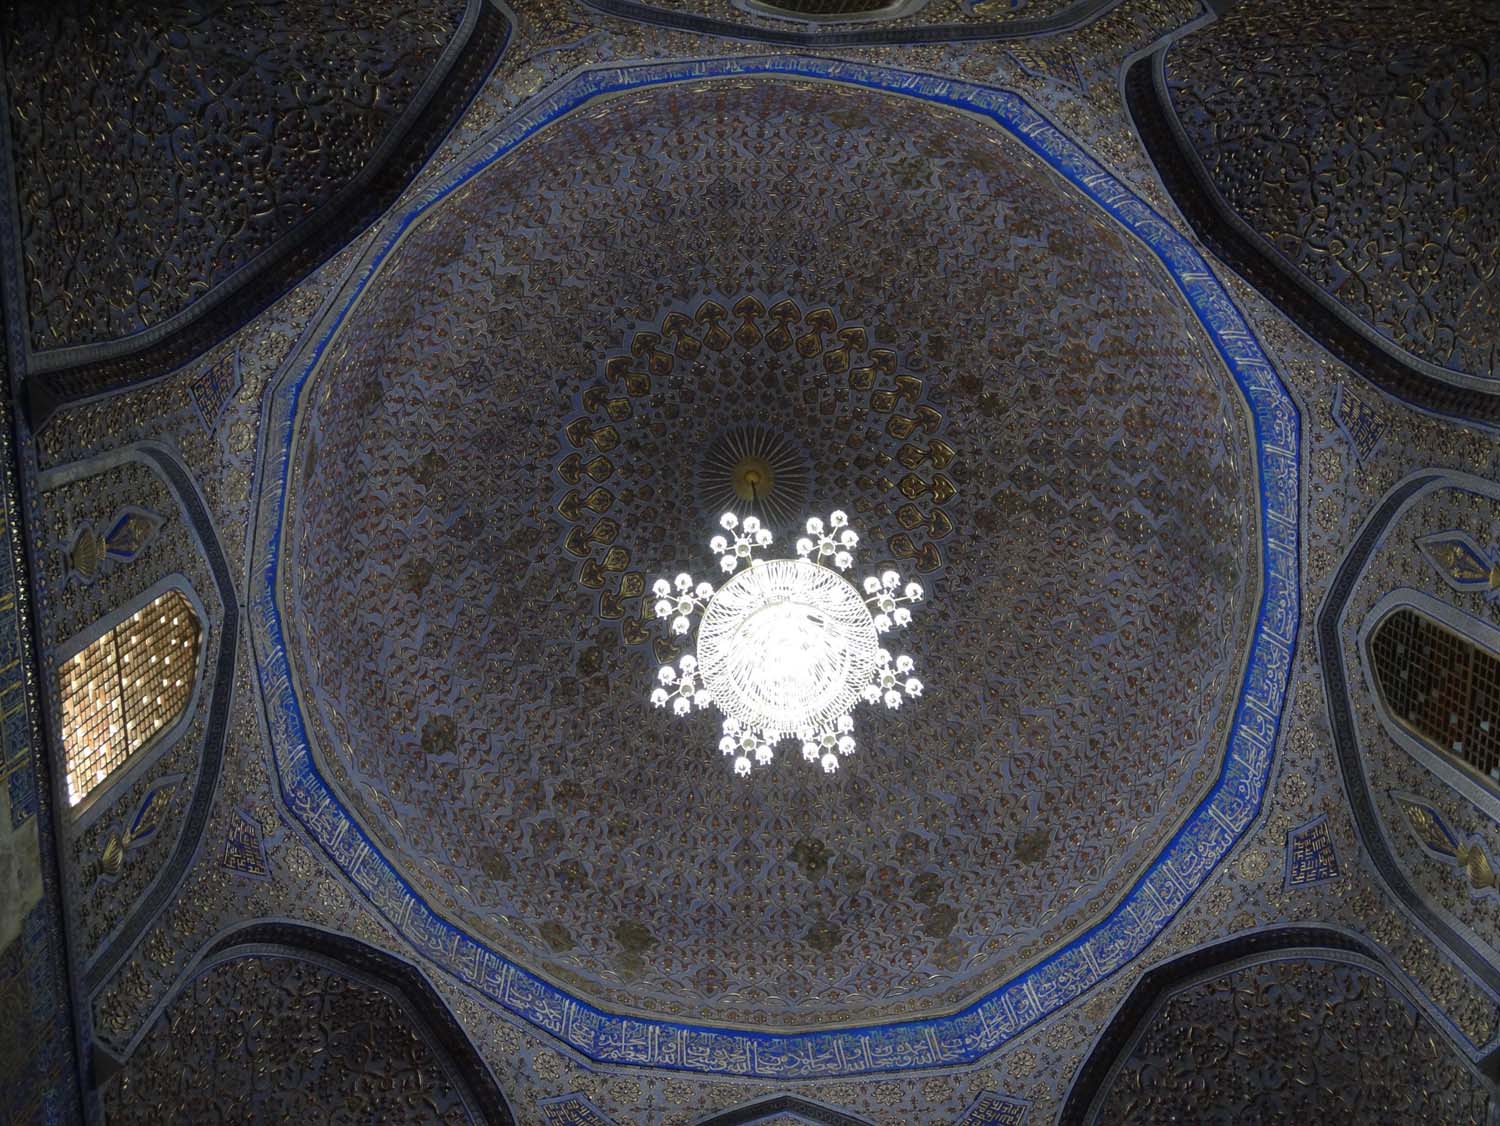 the ceiling of the Gur-e-Amir mausoleum - told you we loved this one!